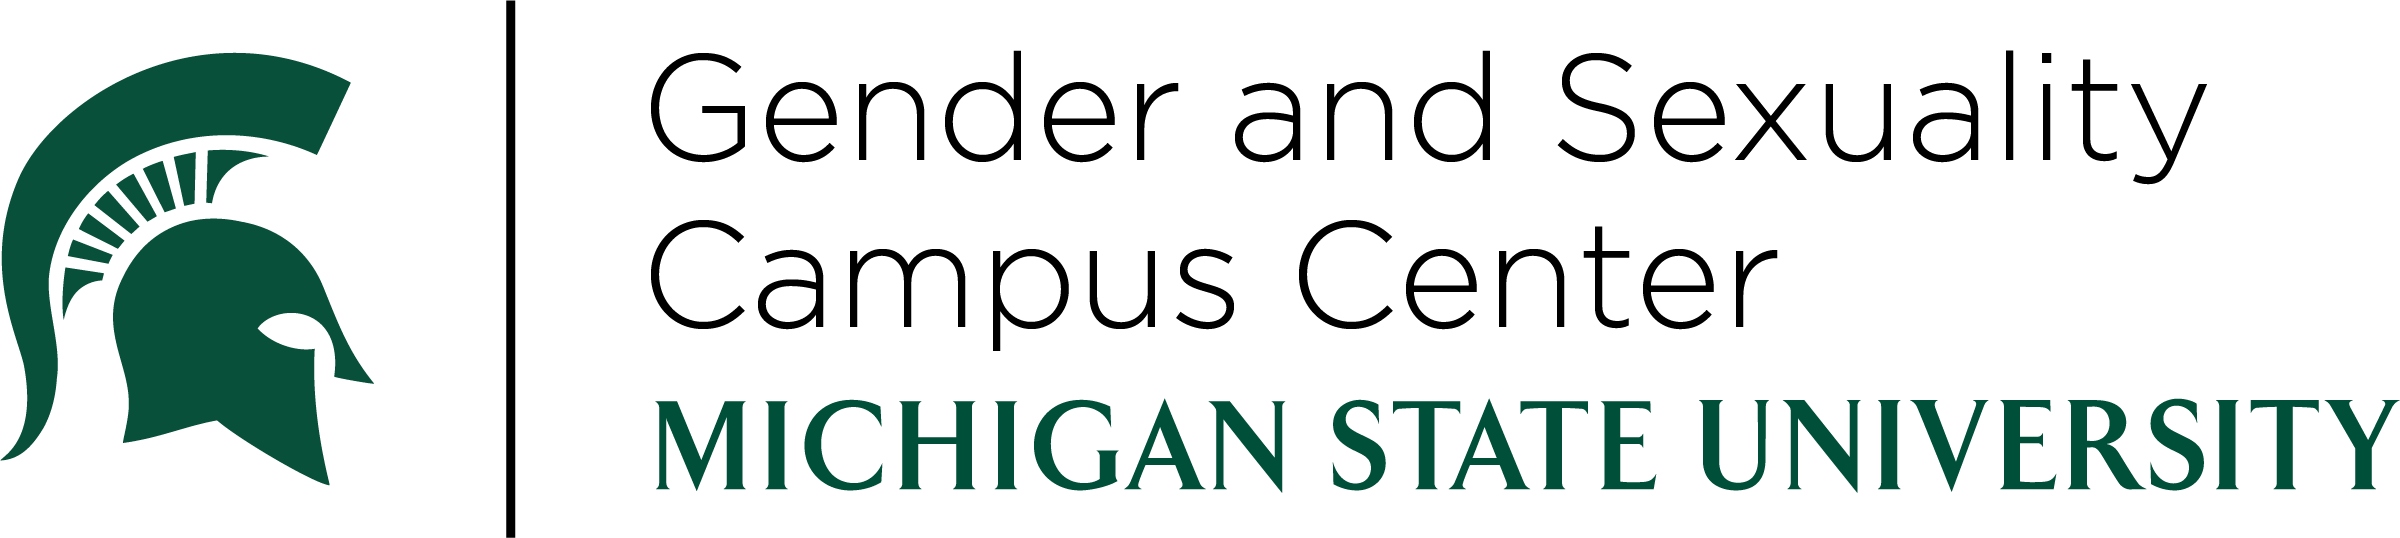 Gender and Sexuality Campus Center